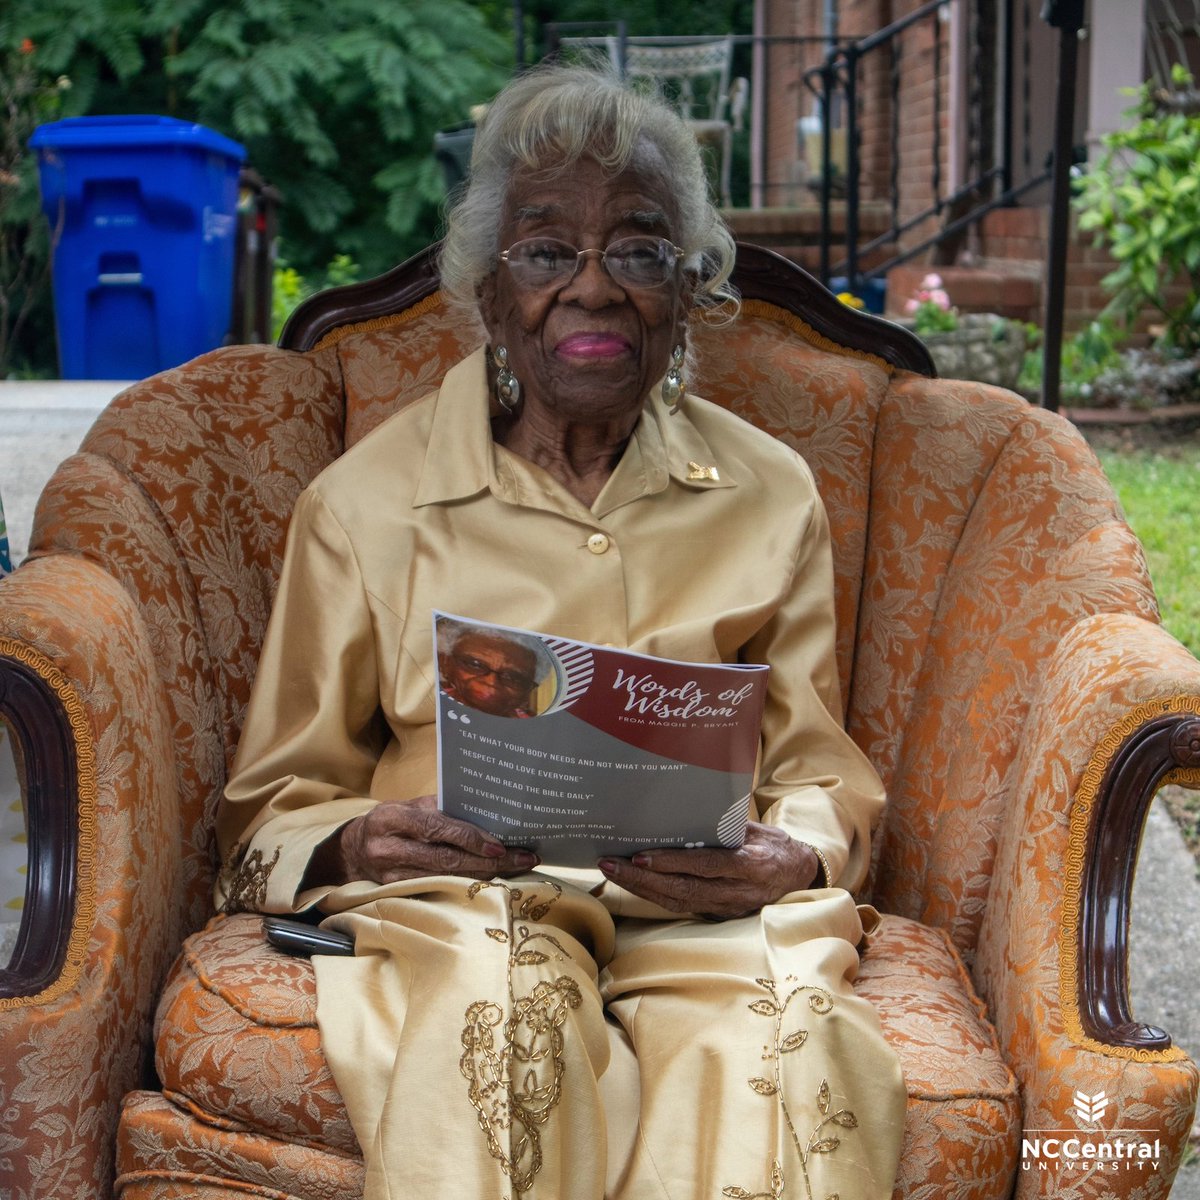 #NCCUAlumni | We are saddened to announce the passing of NCCU's oldest living alumna, Maggie P. Bryant, on Feb. 25, at age 108. Her contributions will forever be remembered. Here are two tribute videos from her 105th and 106th birthdays. | WATCH: bit.ly/NCCUMaggiePBry…